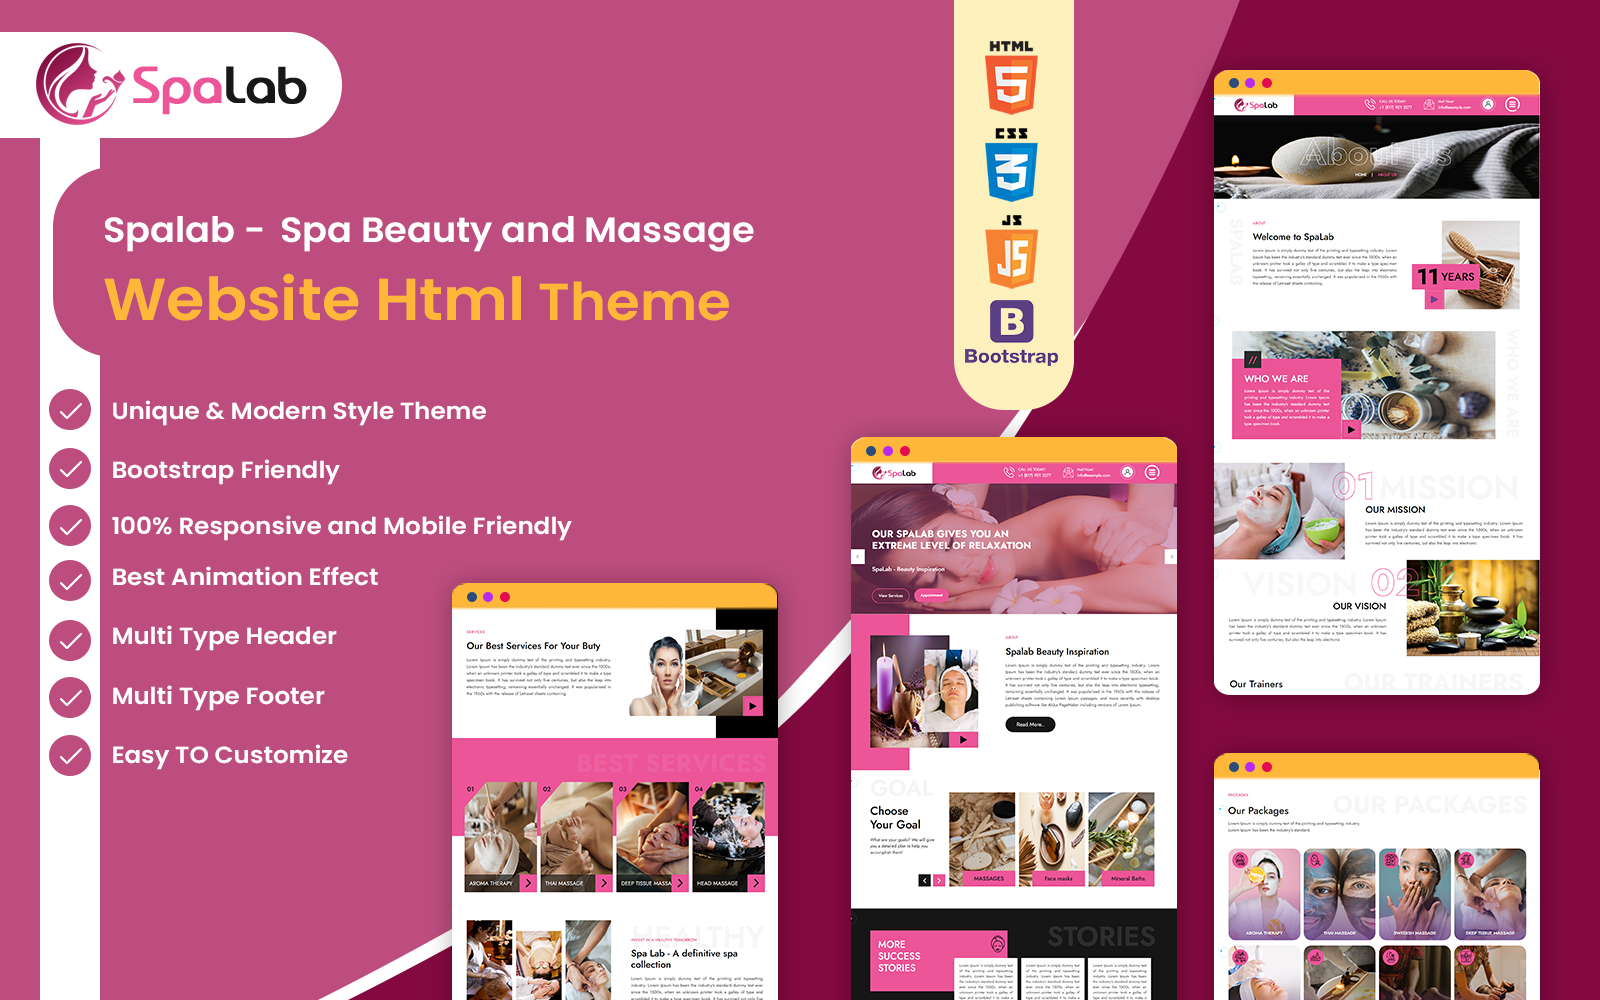 Spalab – Spa Beauty and Massage Website Template